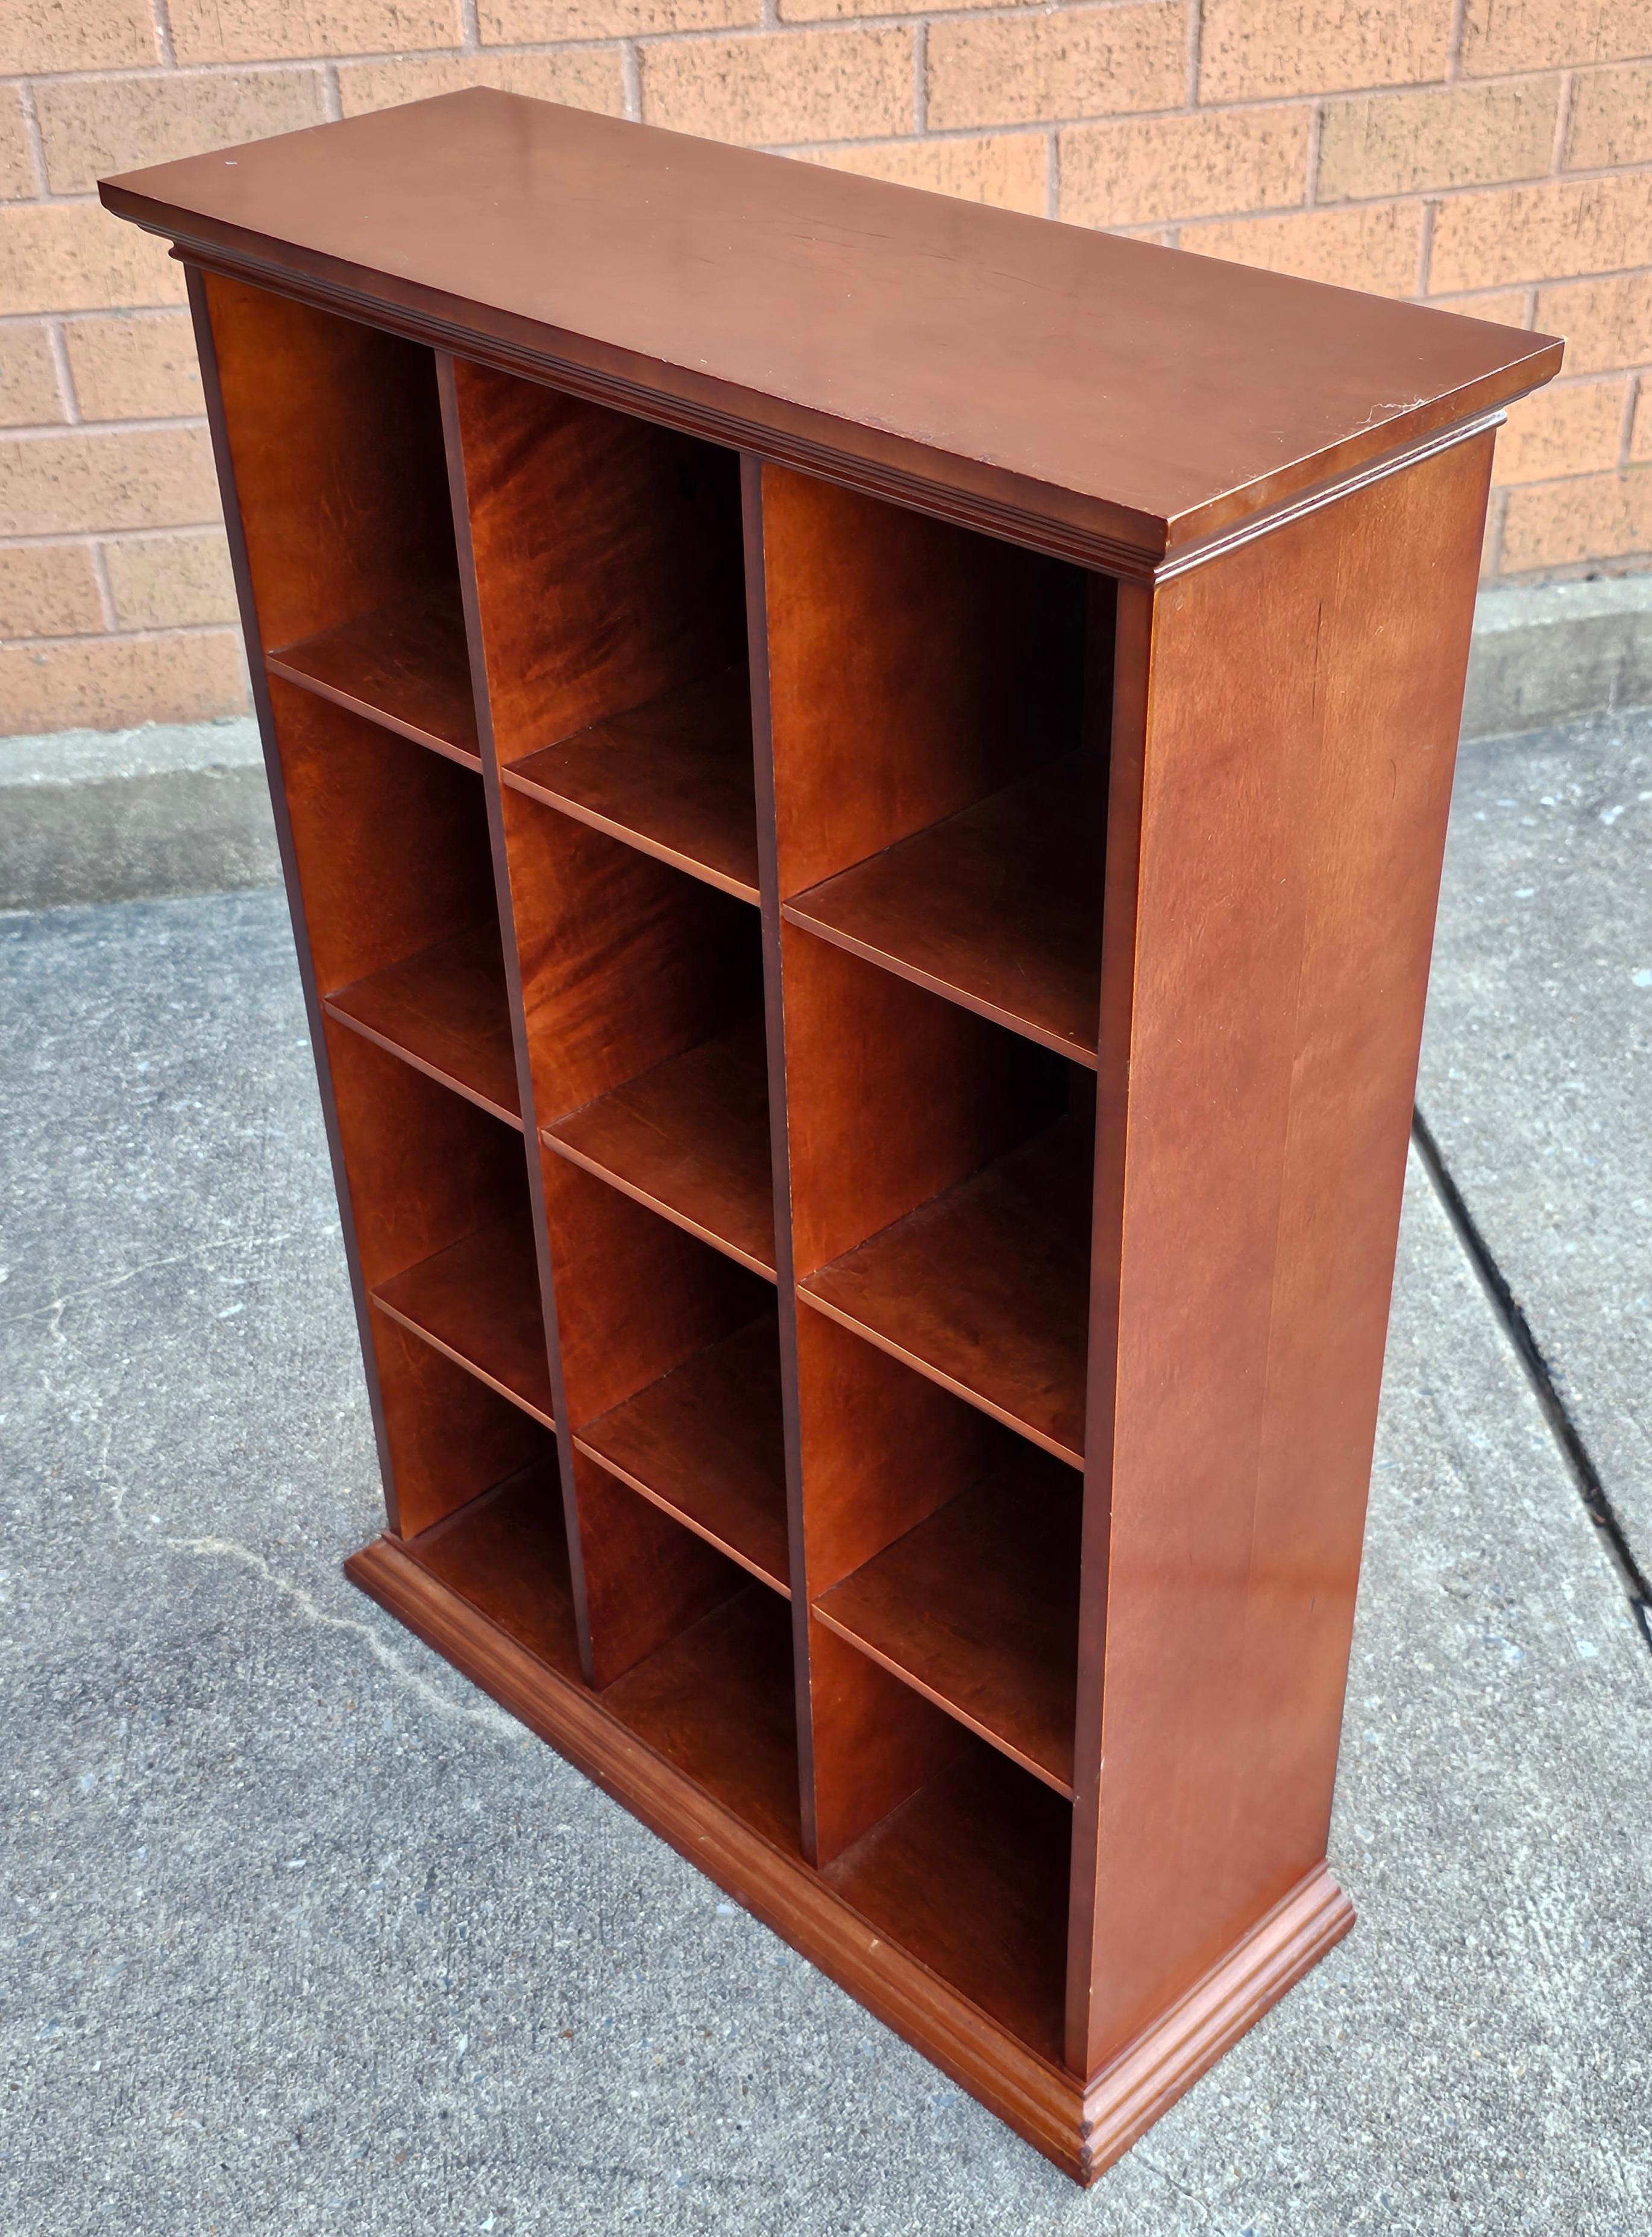 A Late 20th Century Solid Cherry Pigeon Hole Cube Bookcase in lacquered finish. Each cube measures 5.6